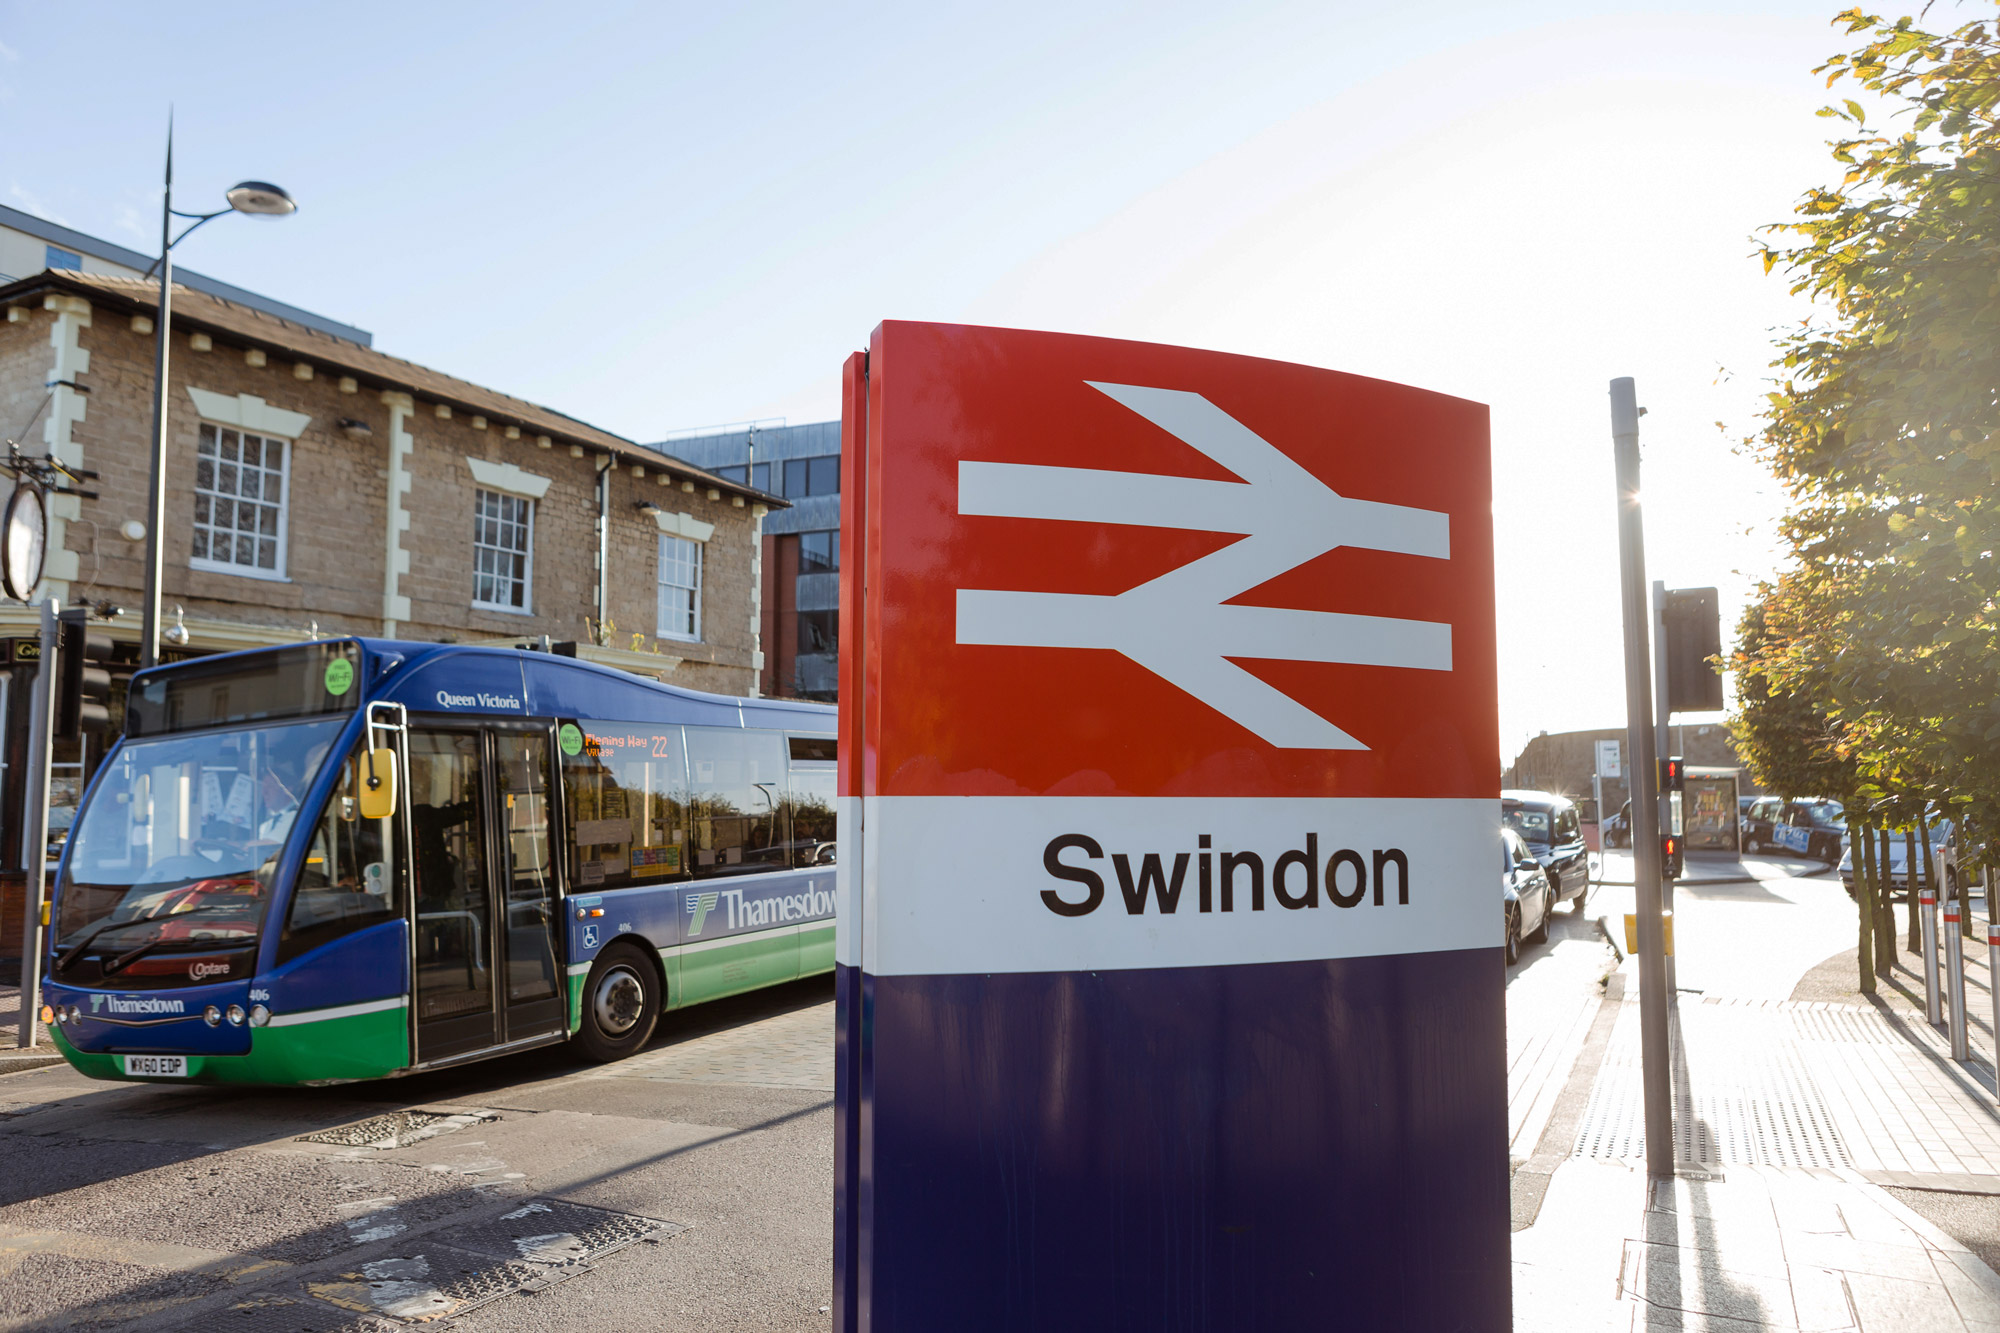 Switch on to Swindon